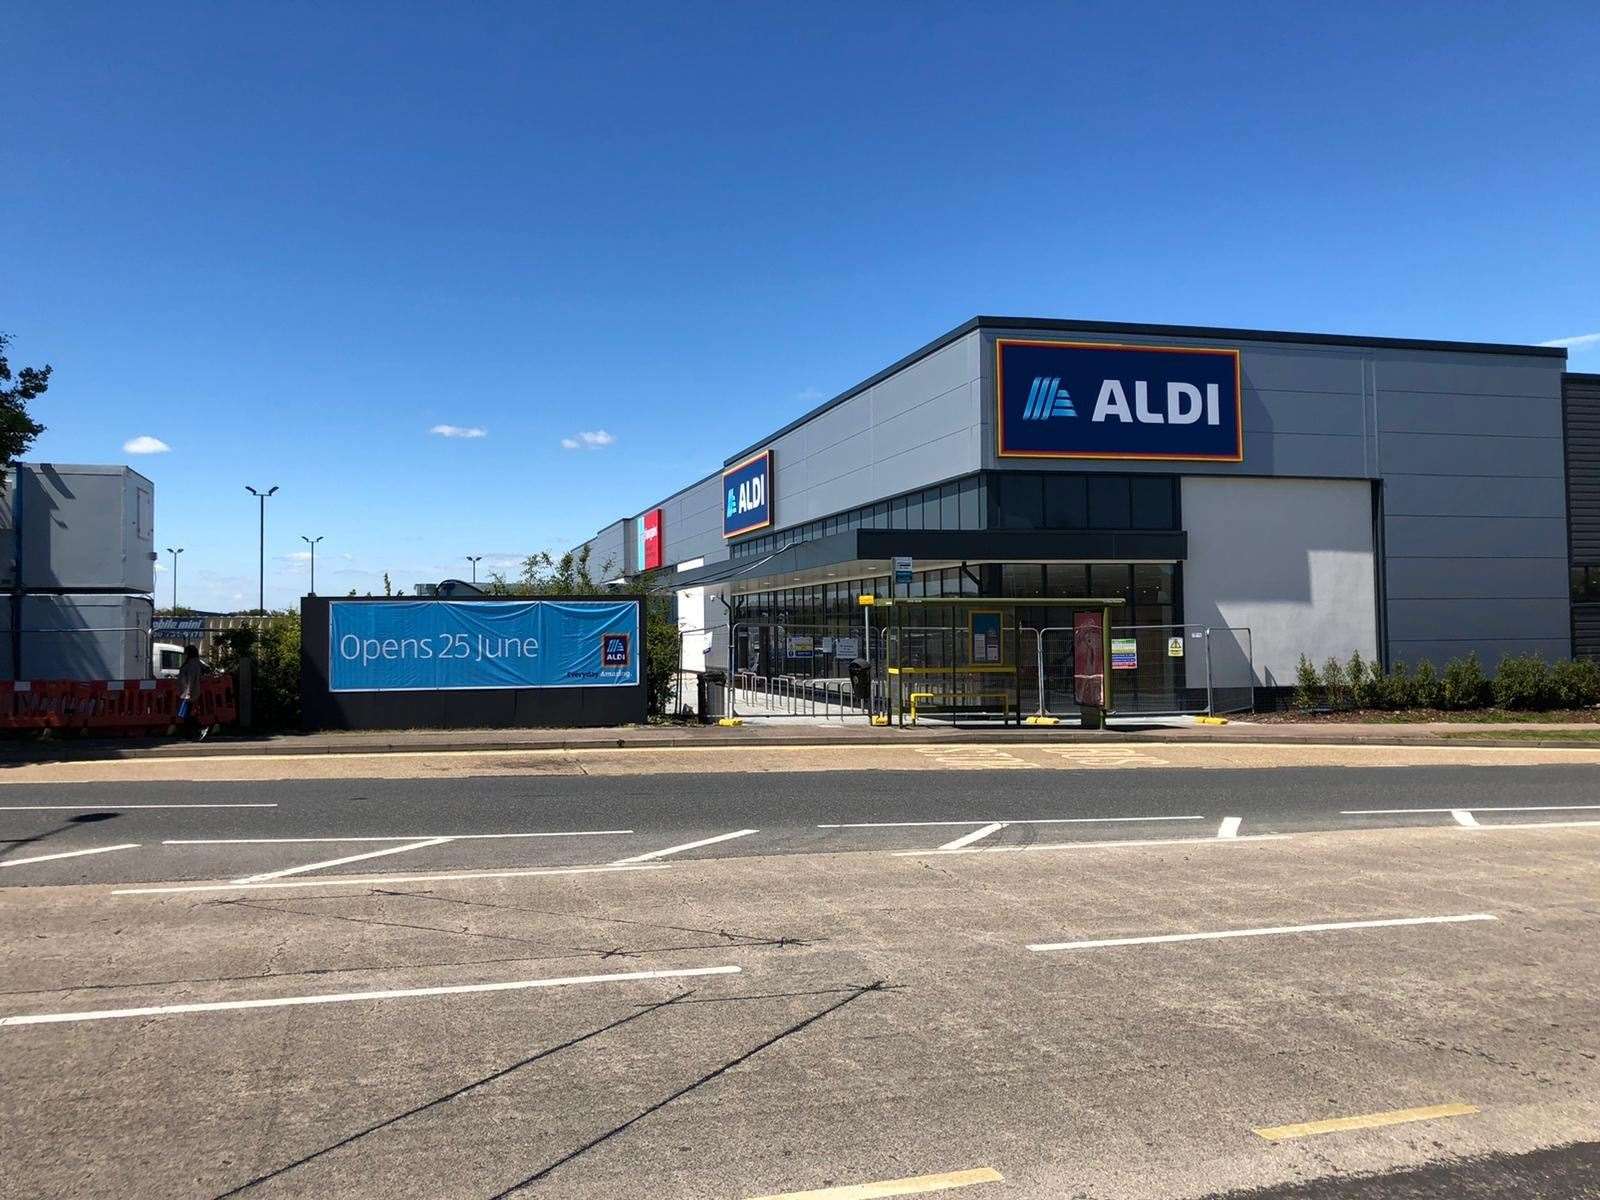 Aldi opened a Chatham branch last week to much fanfare